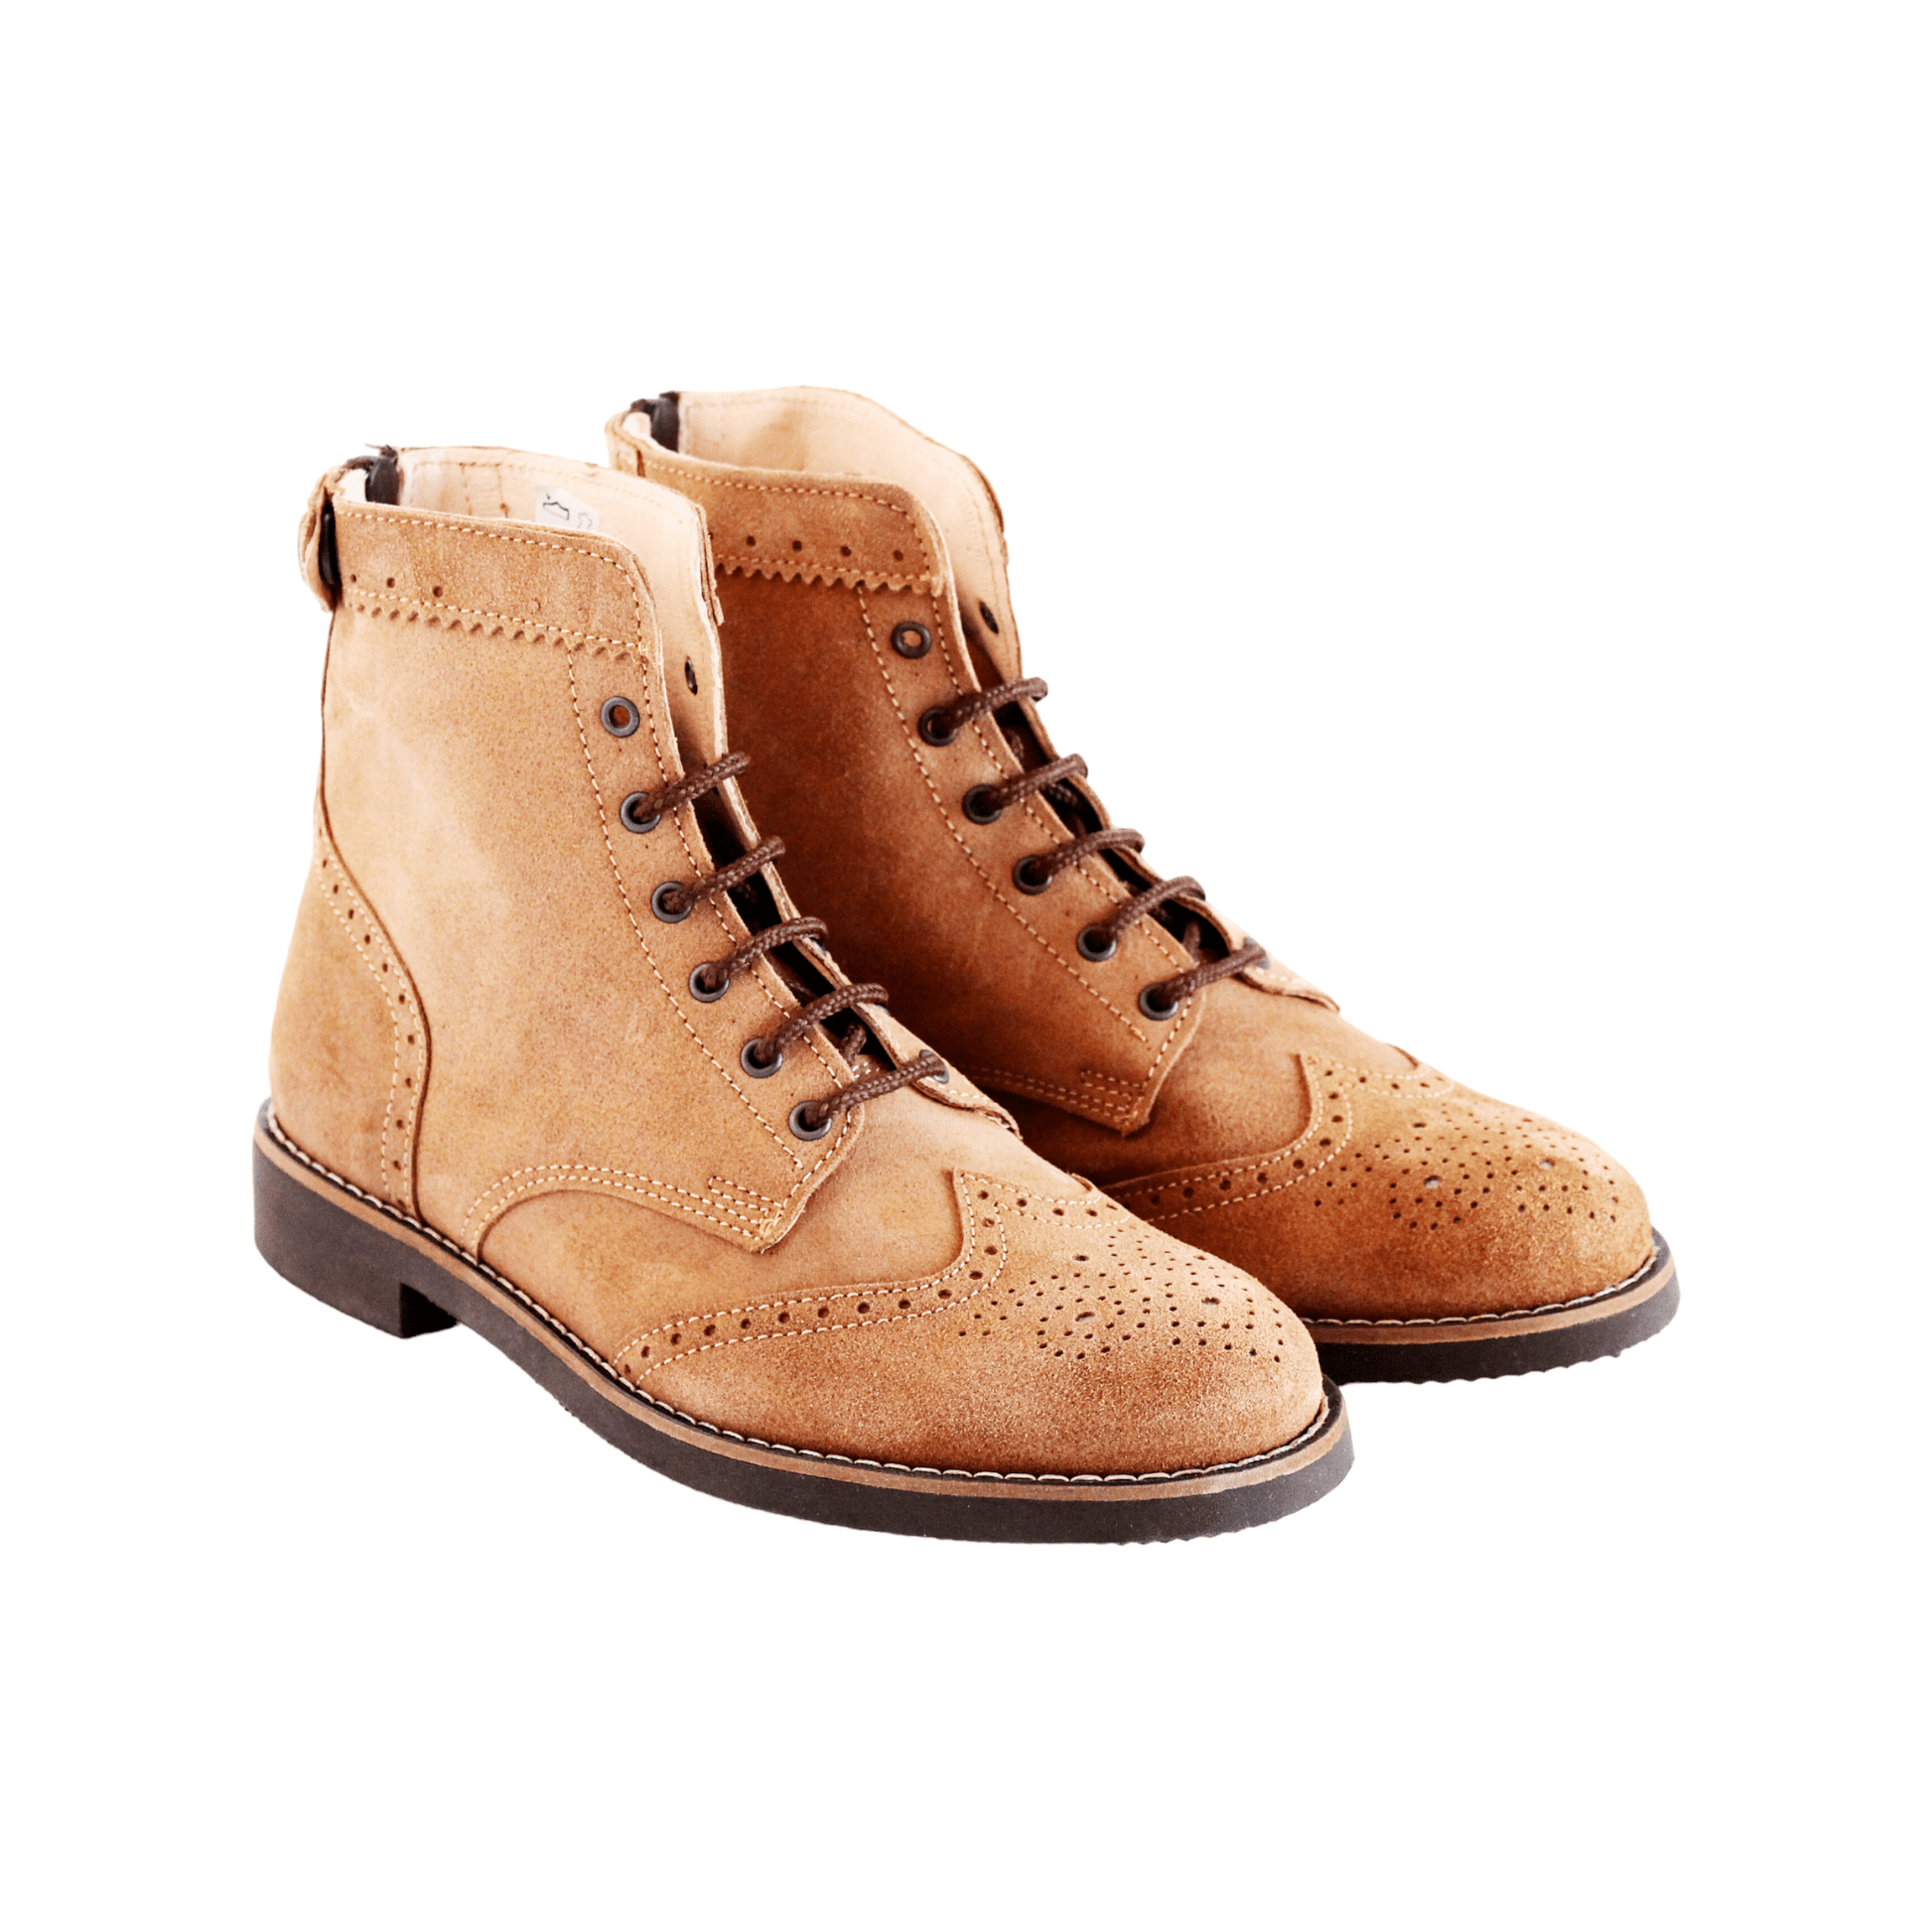 Mondego Women Boots - OldMulla - Boots Store, Handmade By George Family